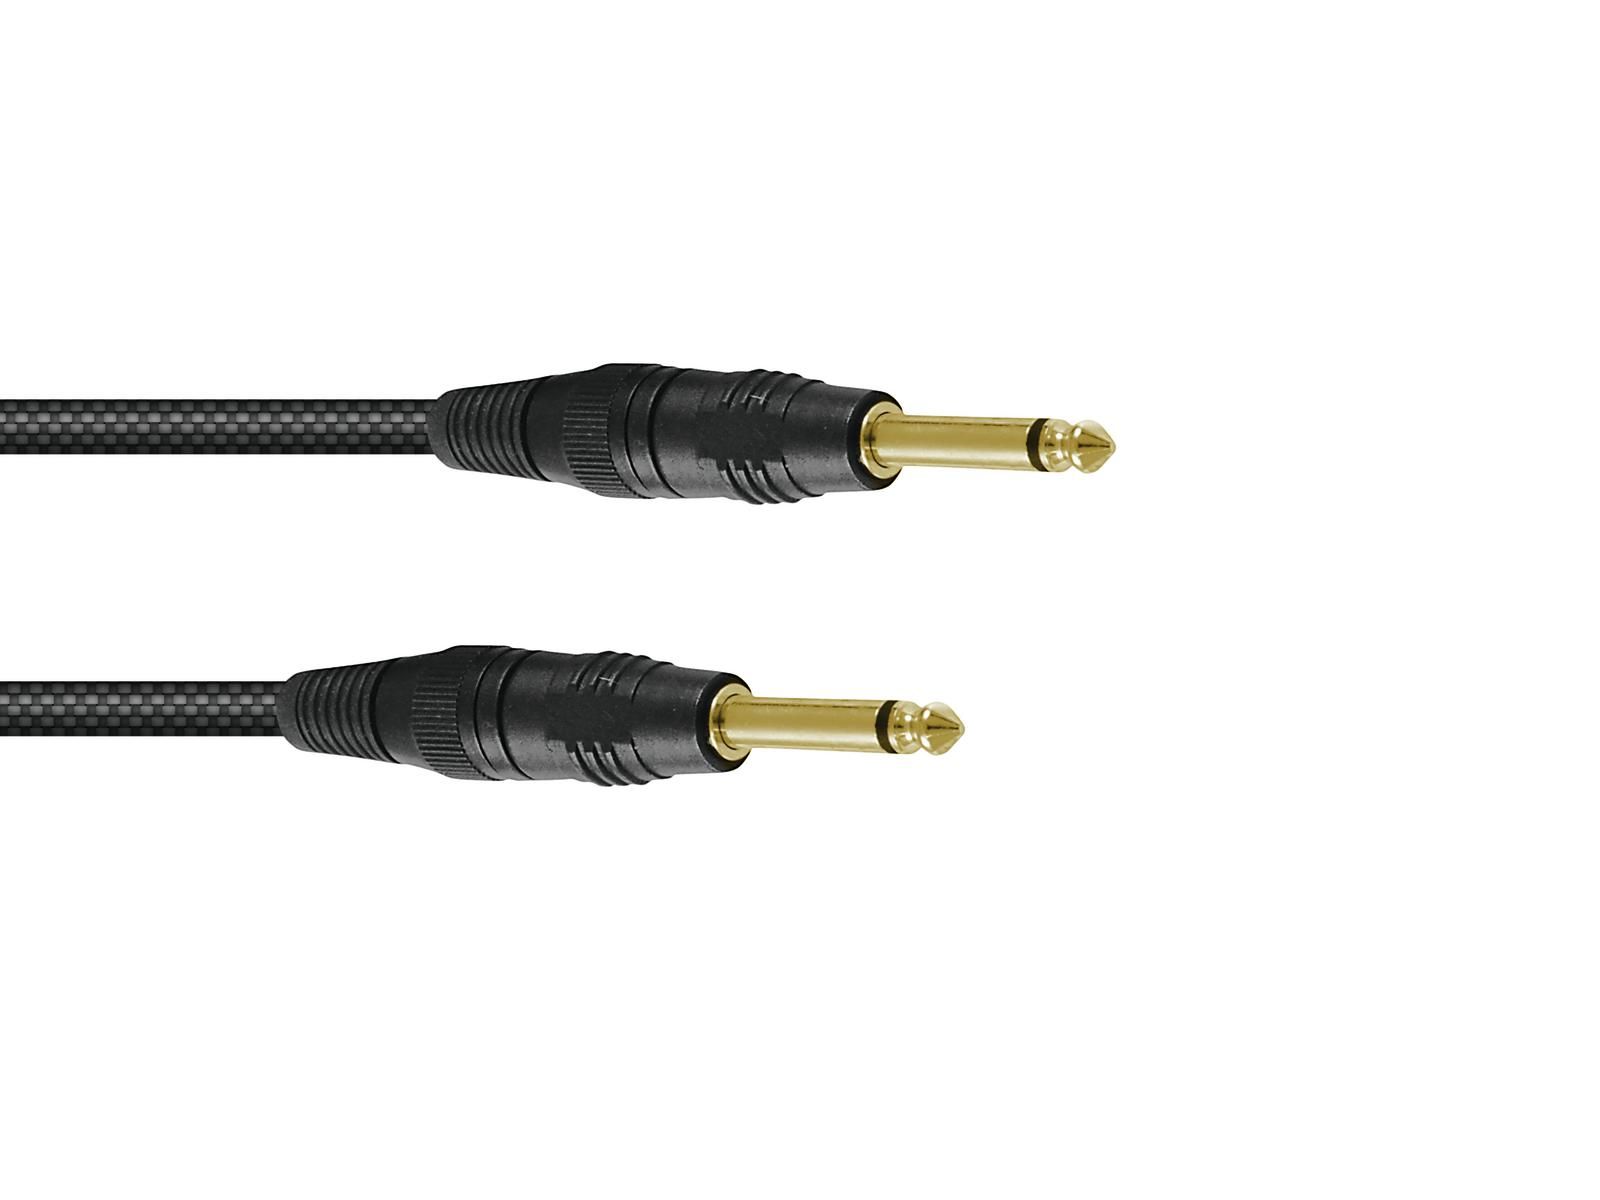 Sommer Jack cable 6.3 mono 6m BN Hicon